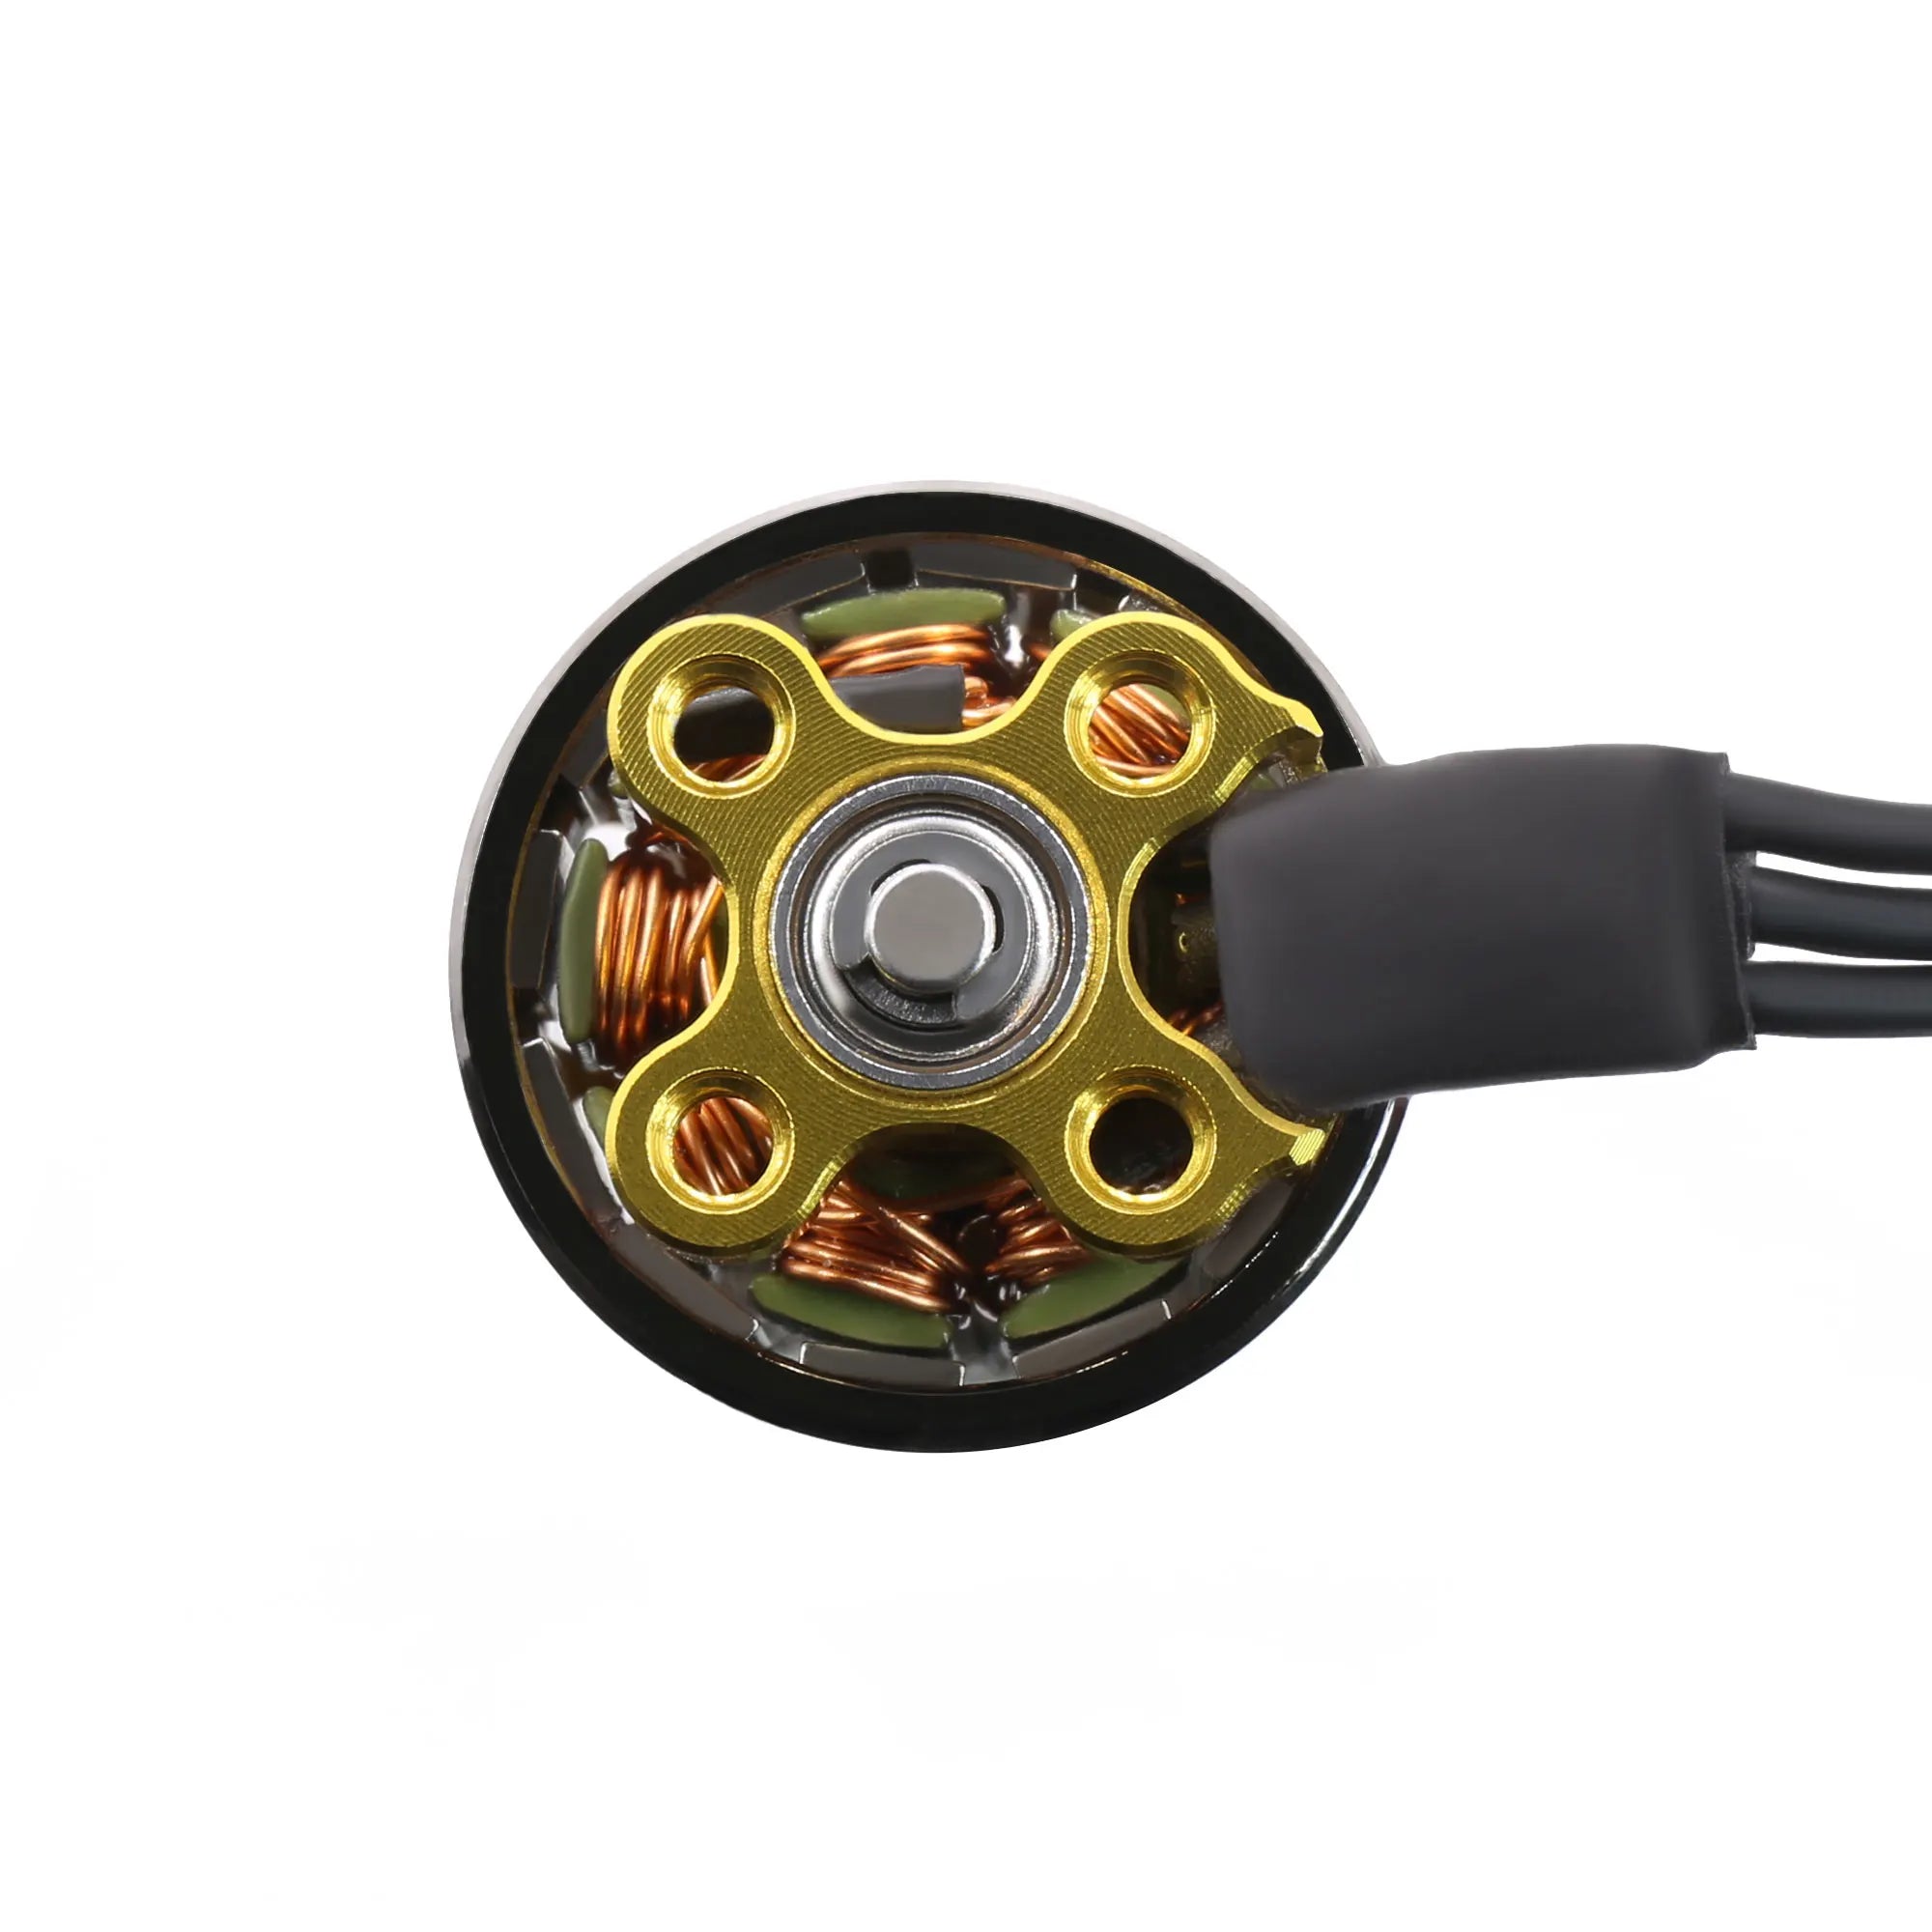 GEPRC GR1204 3750kv Motor, Compatible with 105mm-110mm RC Drone(Whoop Drone and